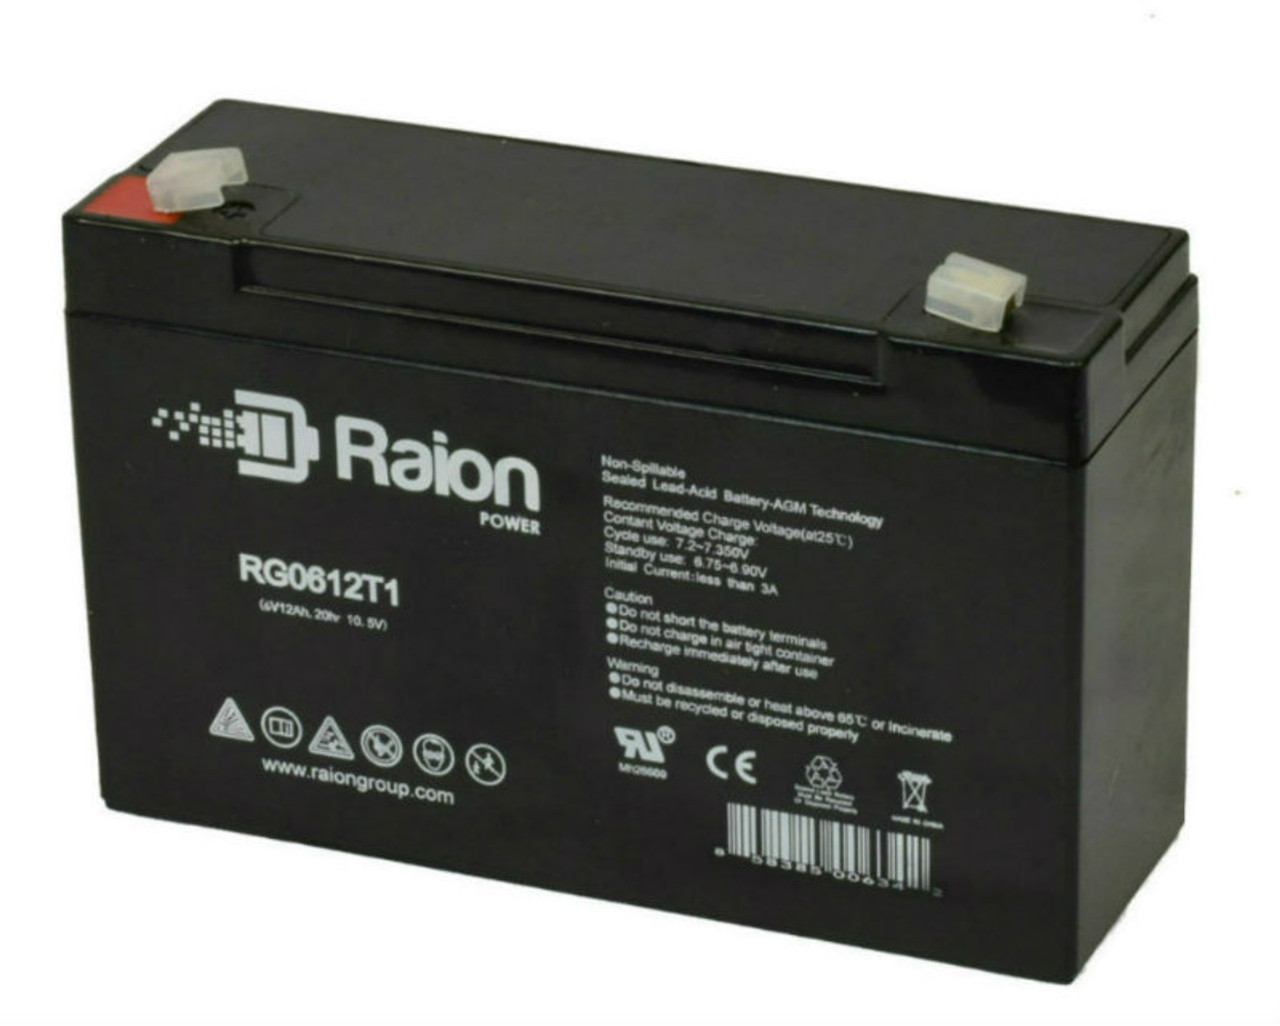 Raion Power RG06120T1 Replacement 6V 12Ah Emergency Light Battery for Light Alarms SL050